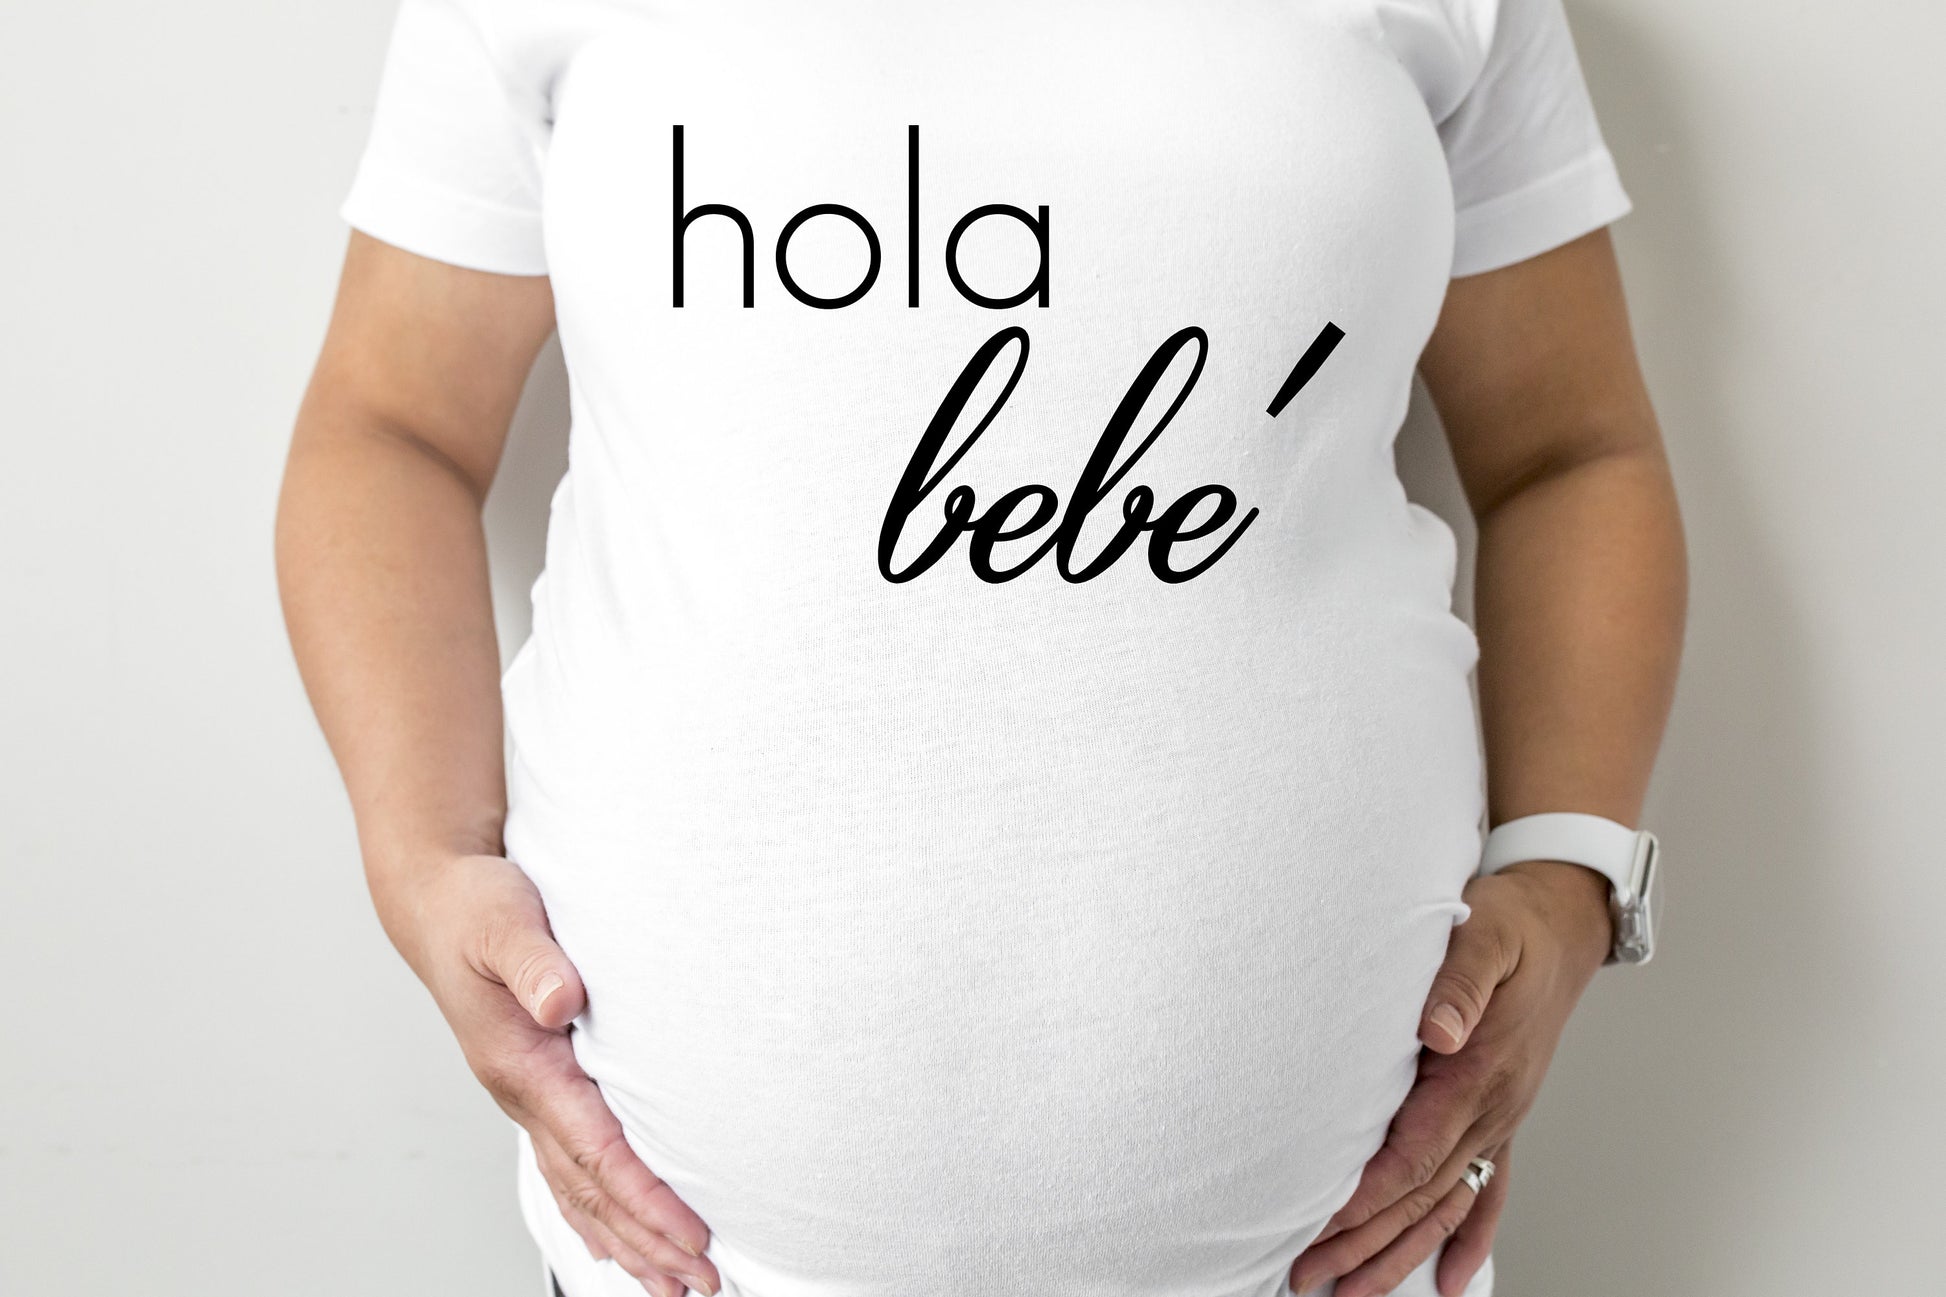 hola bebè Maternity T-Shirt - maternity cut shirt with ruched sides - pregnancy announcement - maternity shirt - spanish maternity shirt